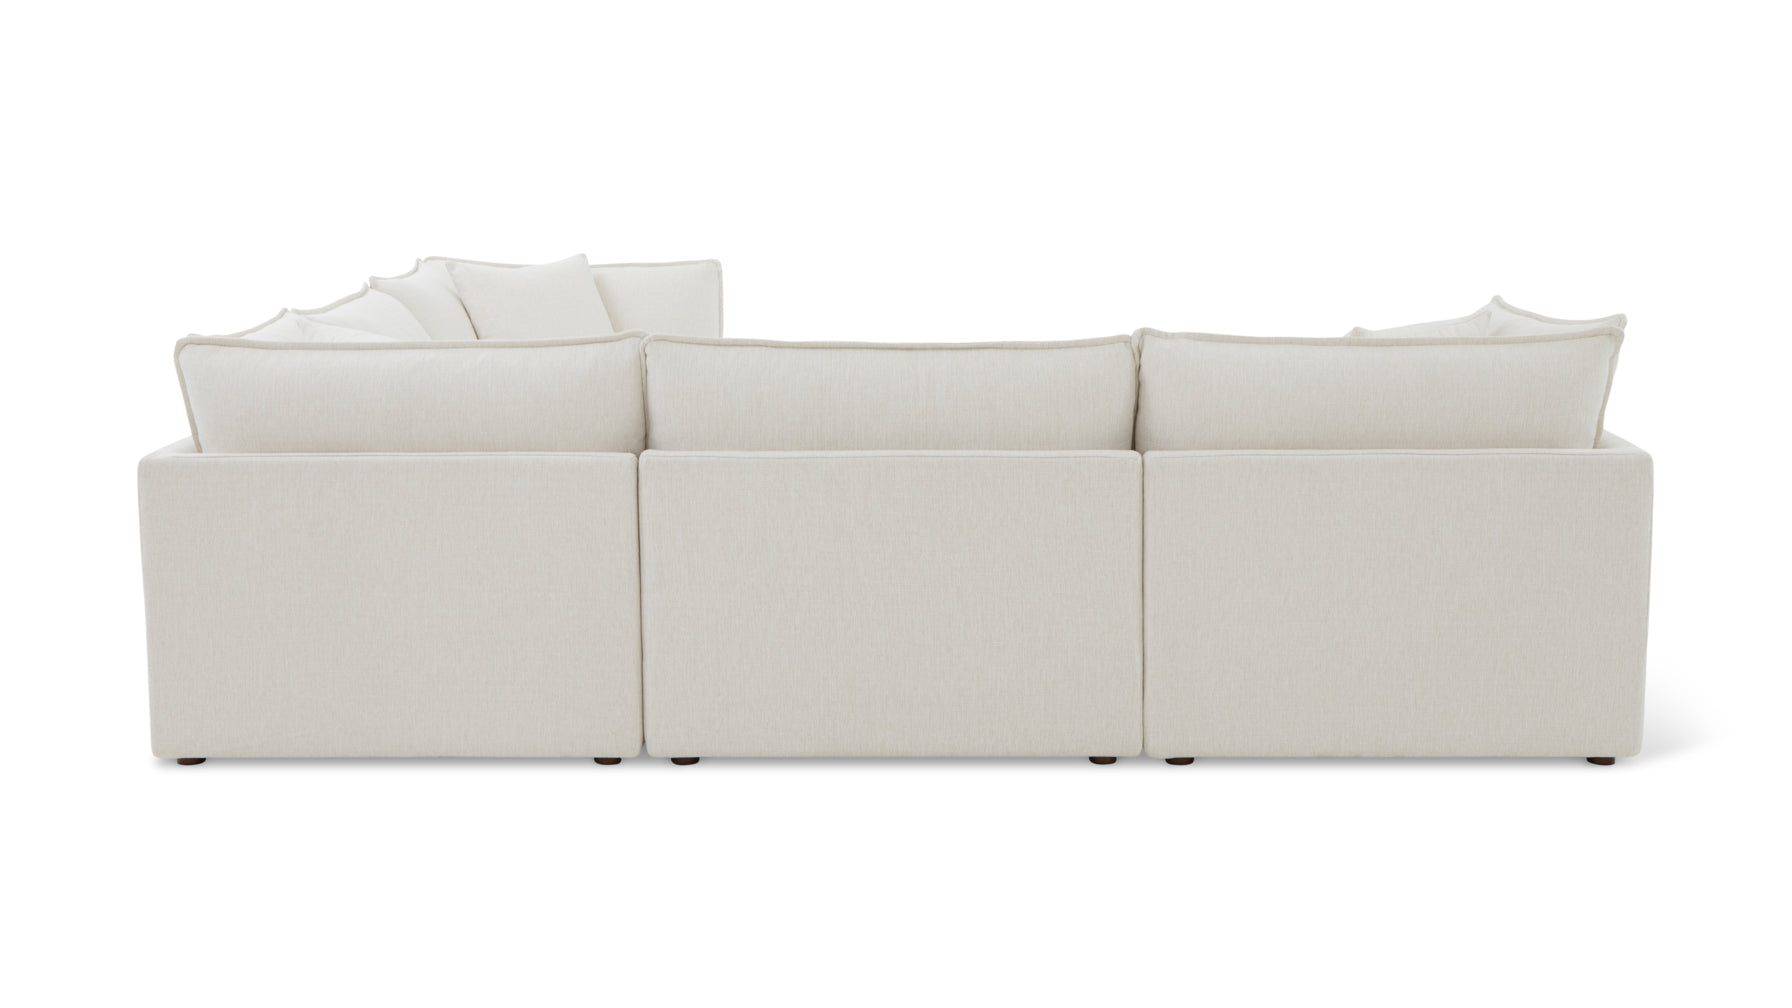 Chill Time 5-Piece Modular Sectional Closed, Birch - Image 7